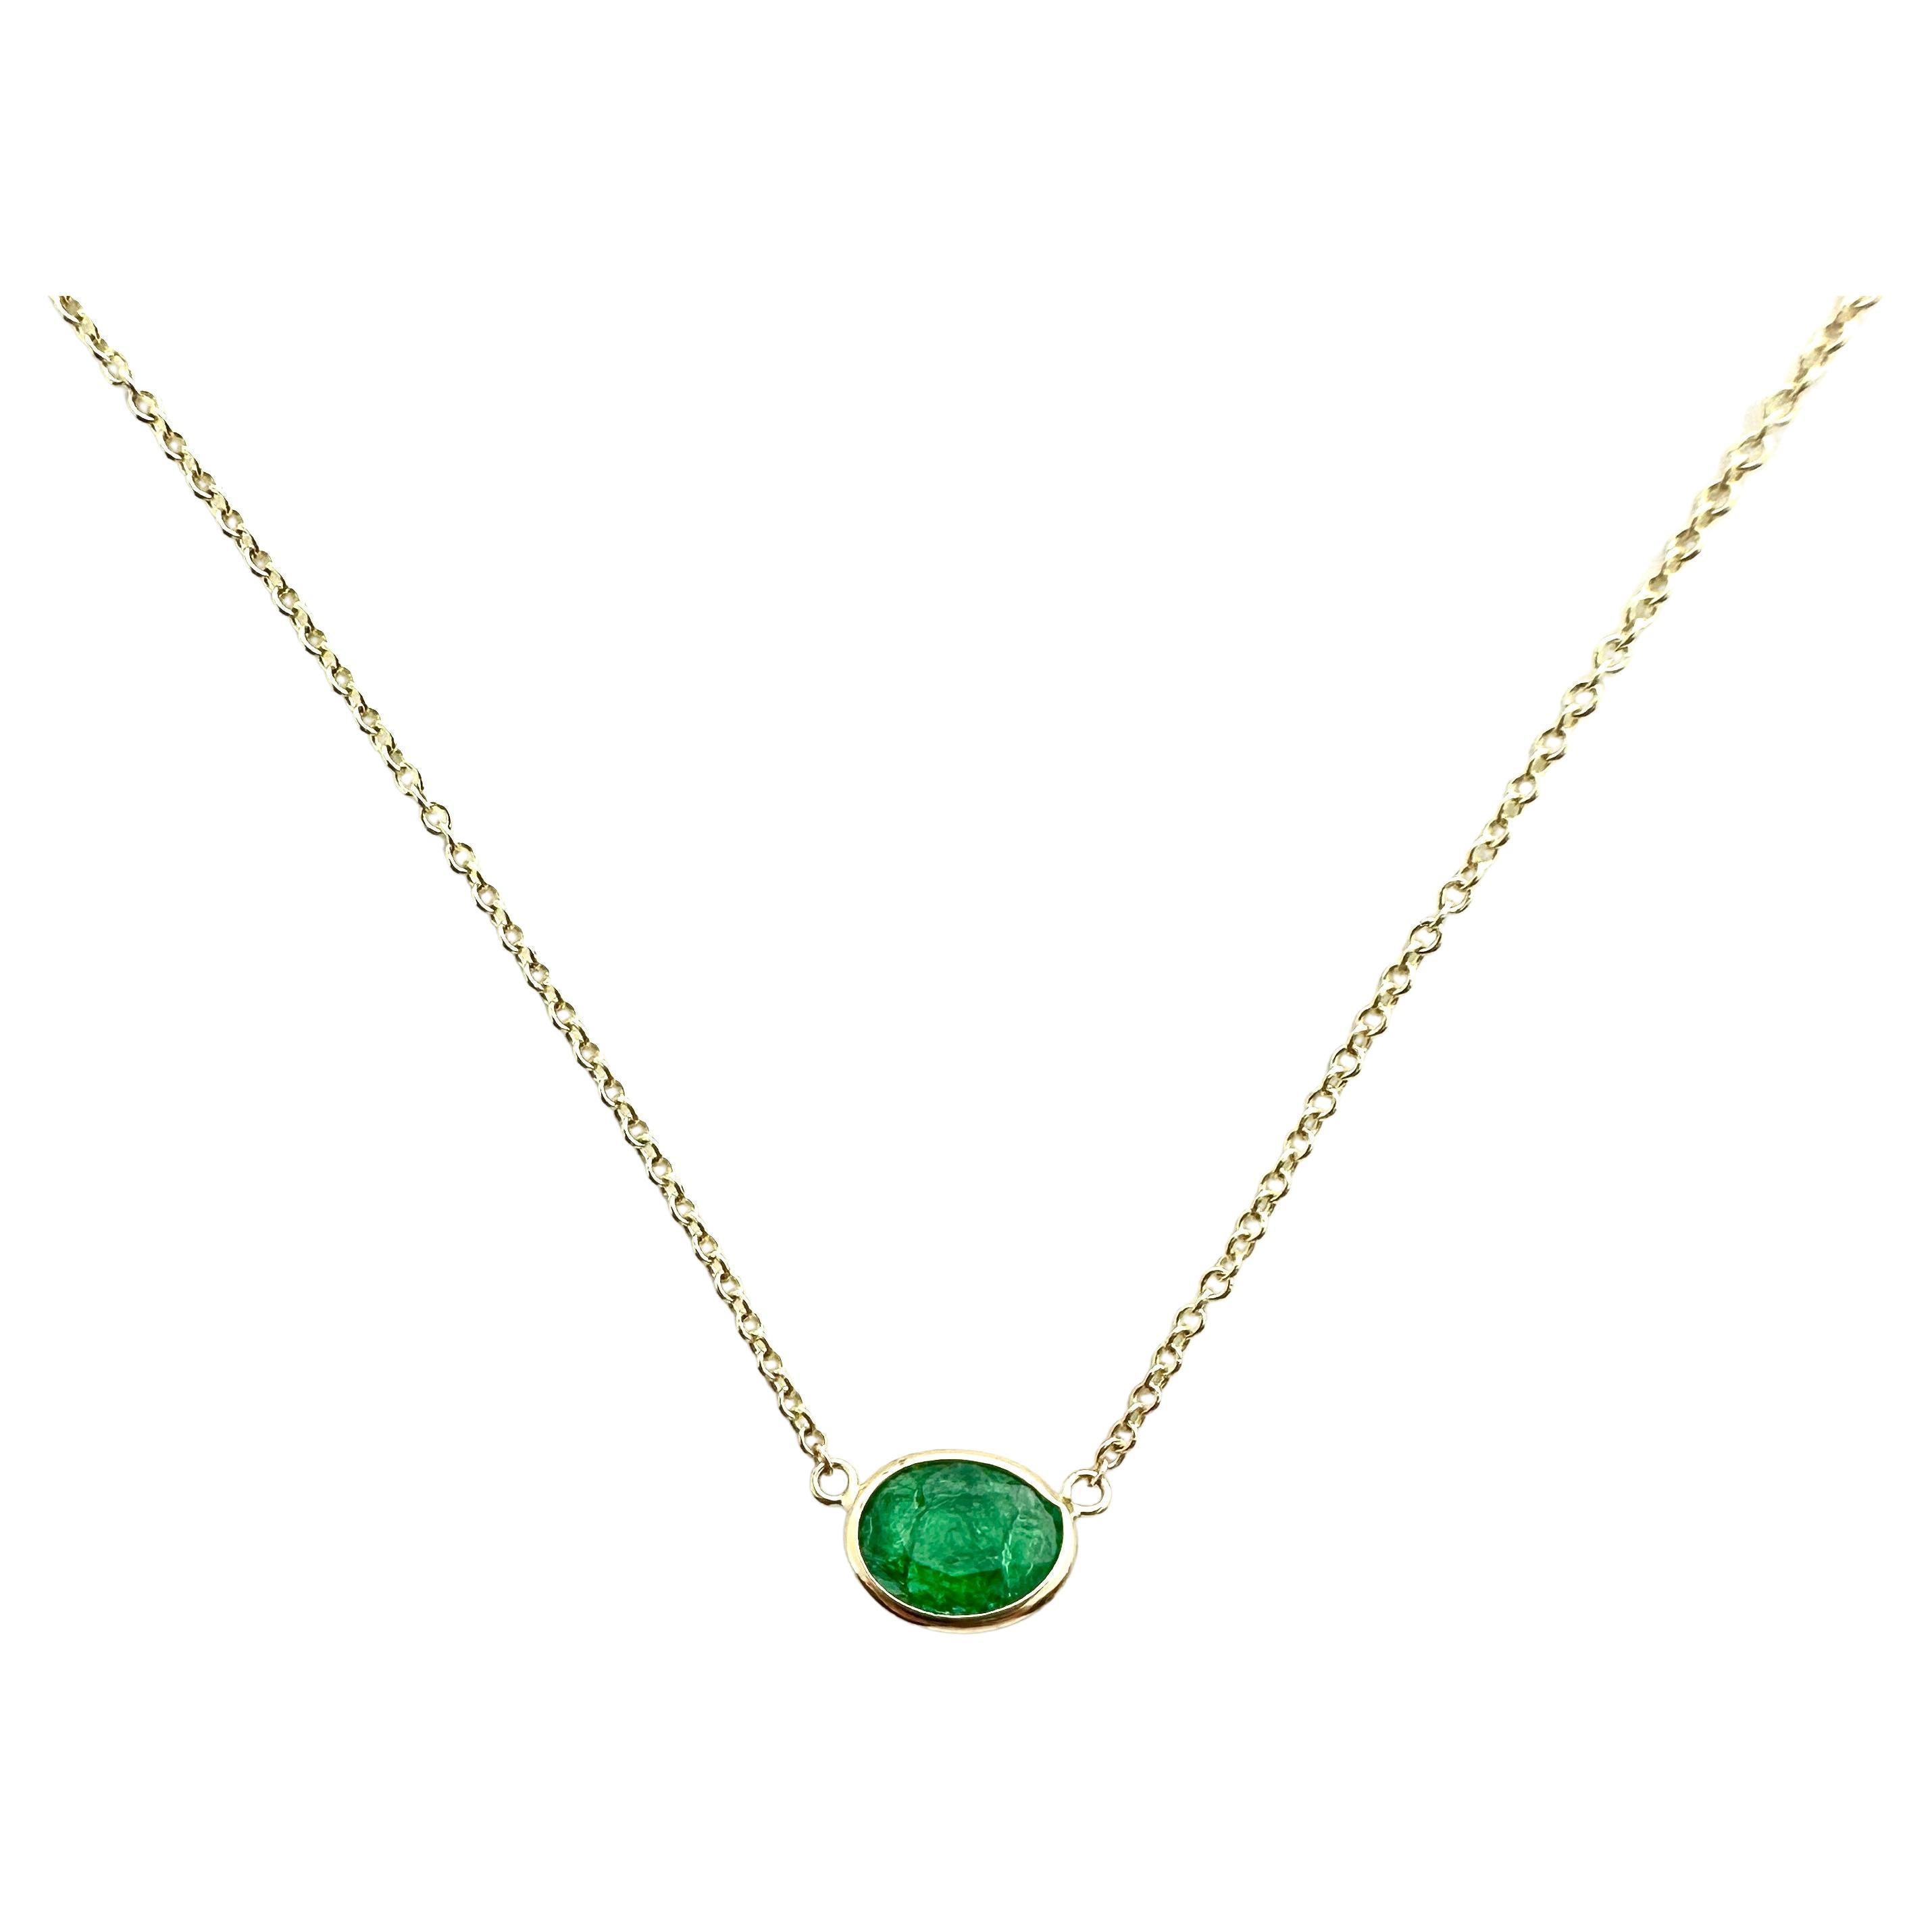 1.32 Carat Emerald Oval IGITL Certified & Fashion Necklaces In 14K Yellow Gold For Sale